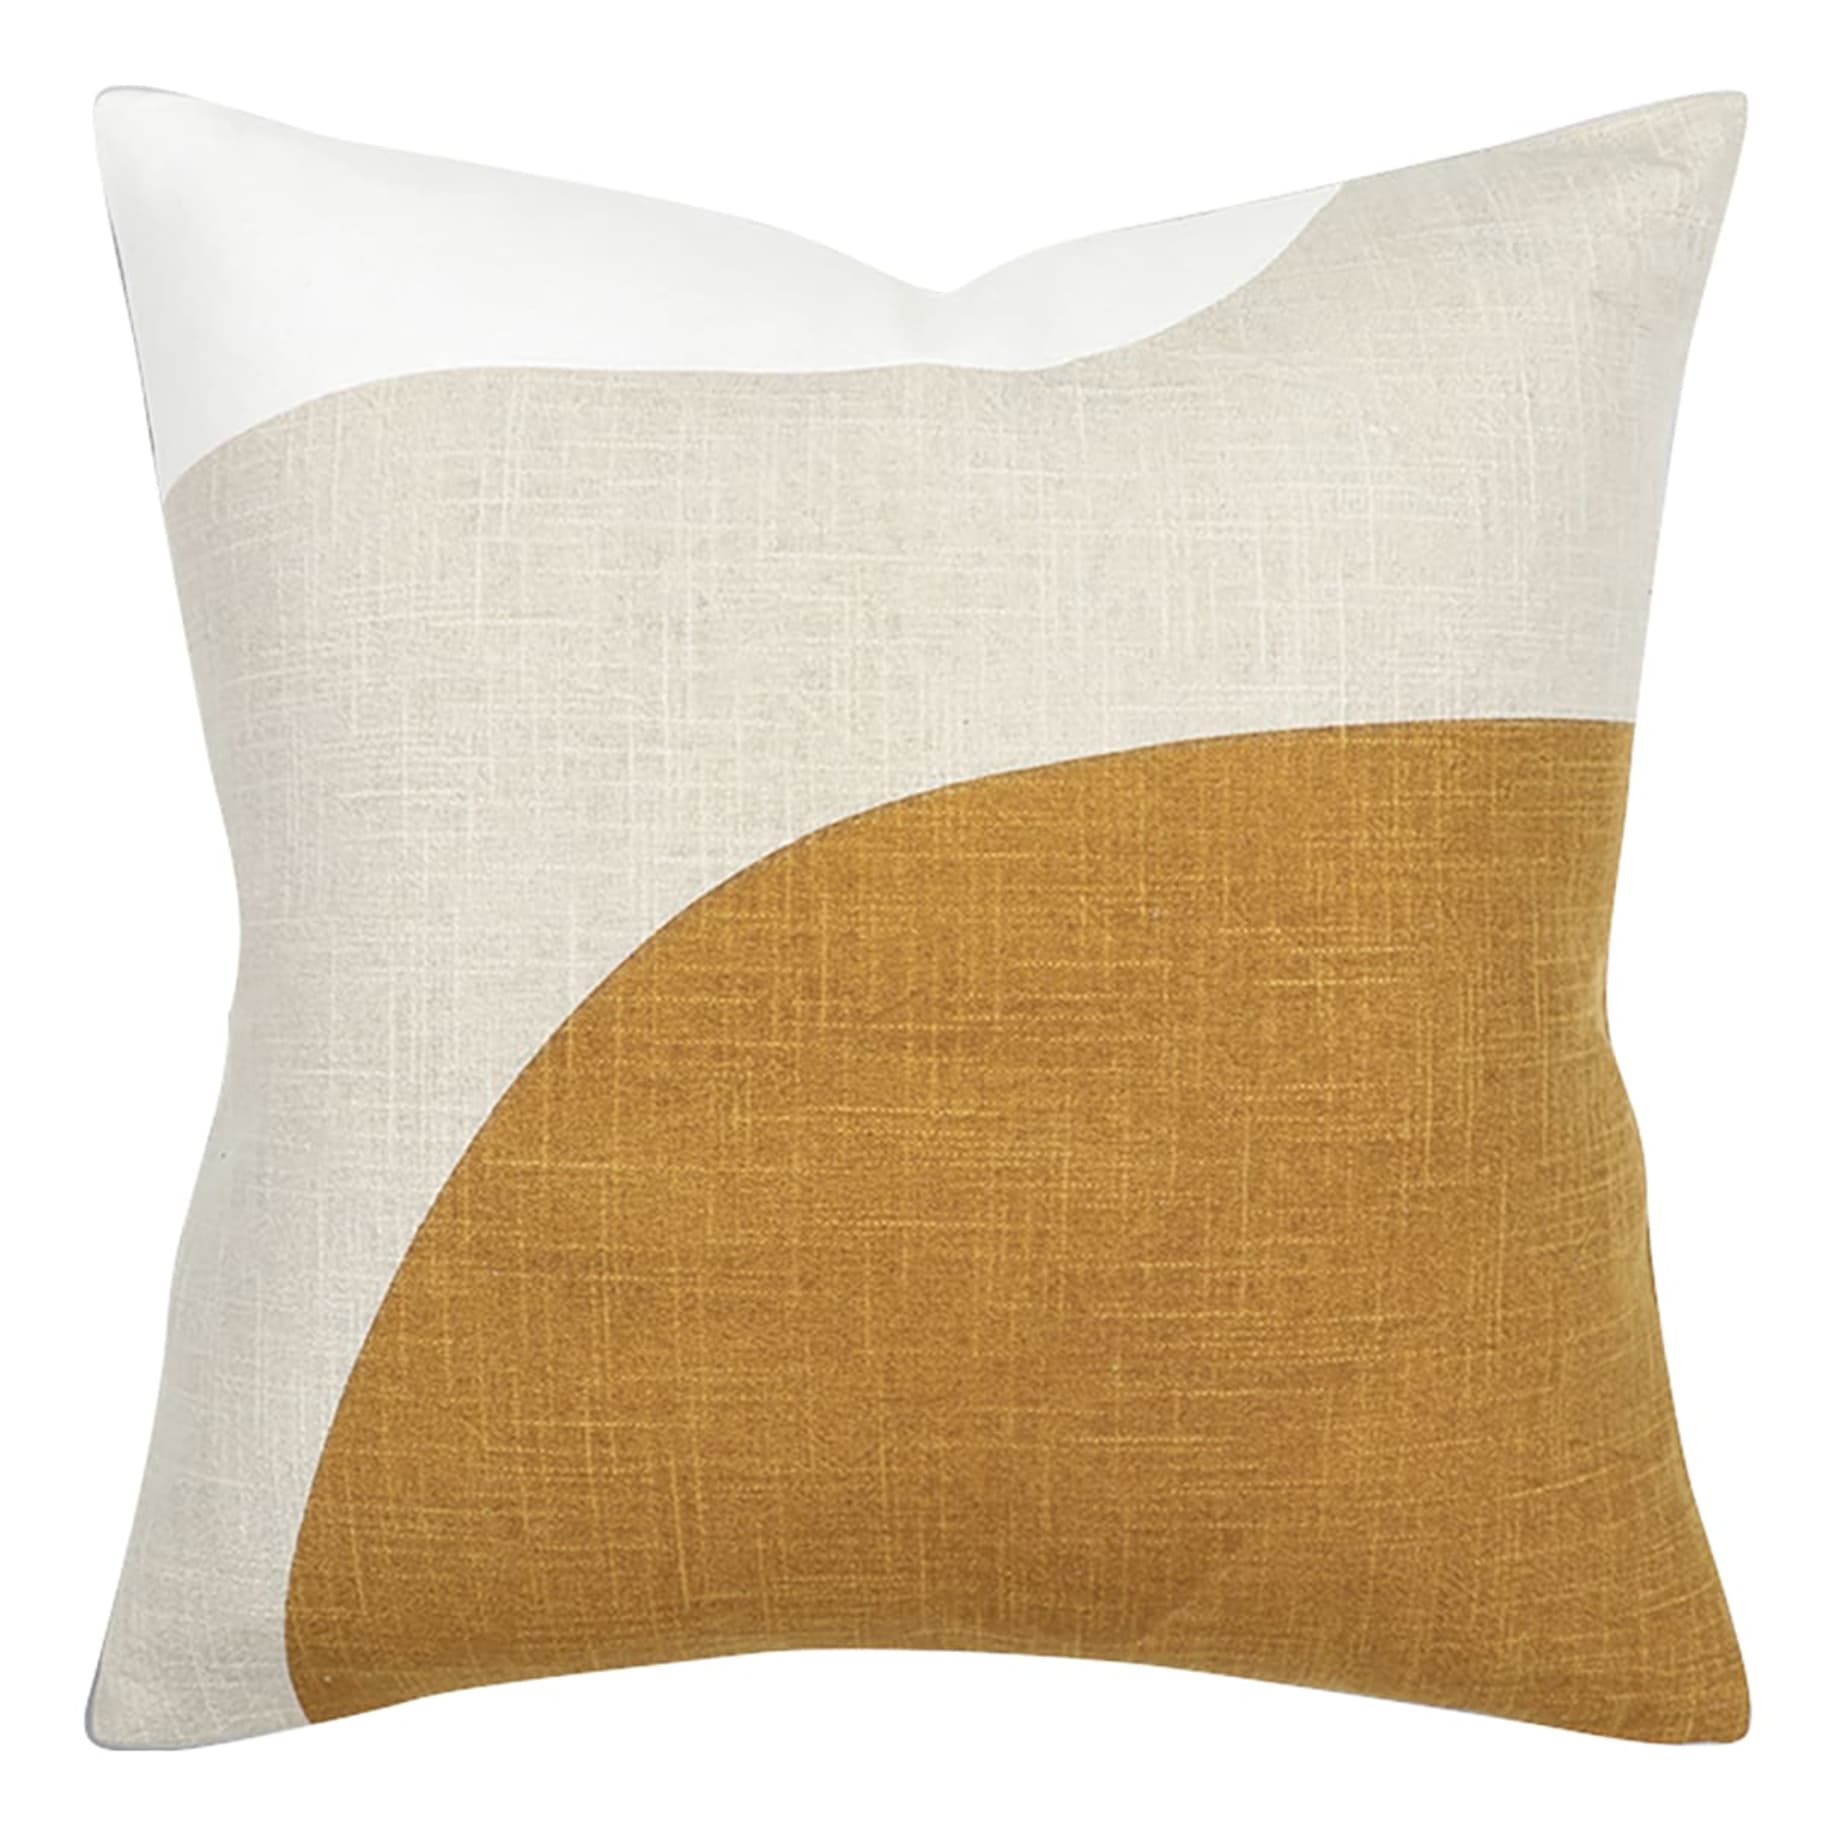 Nina Feather Fill Cushion 50x50cm in Toffee